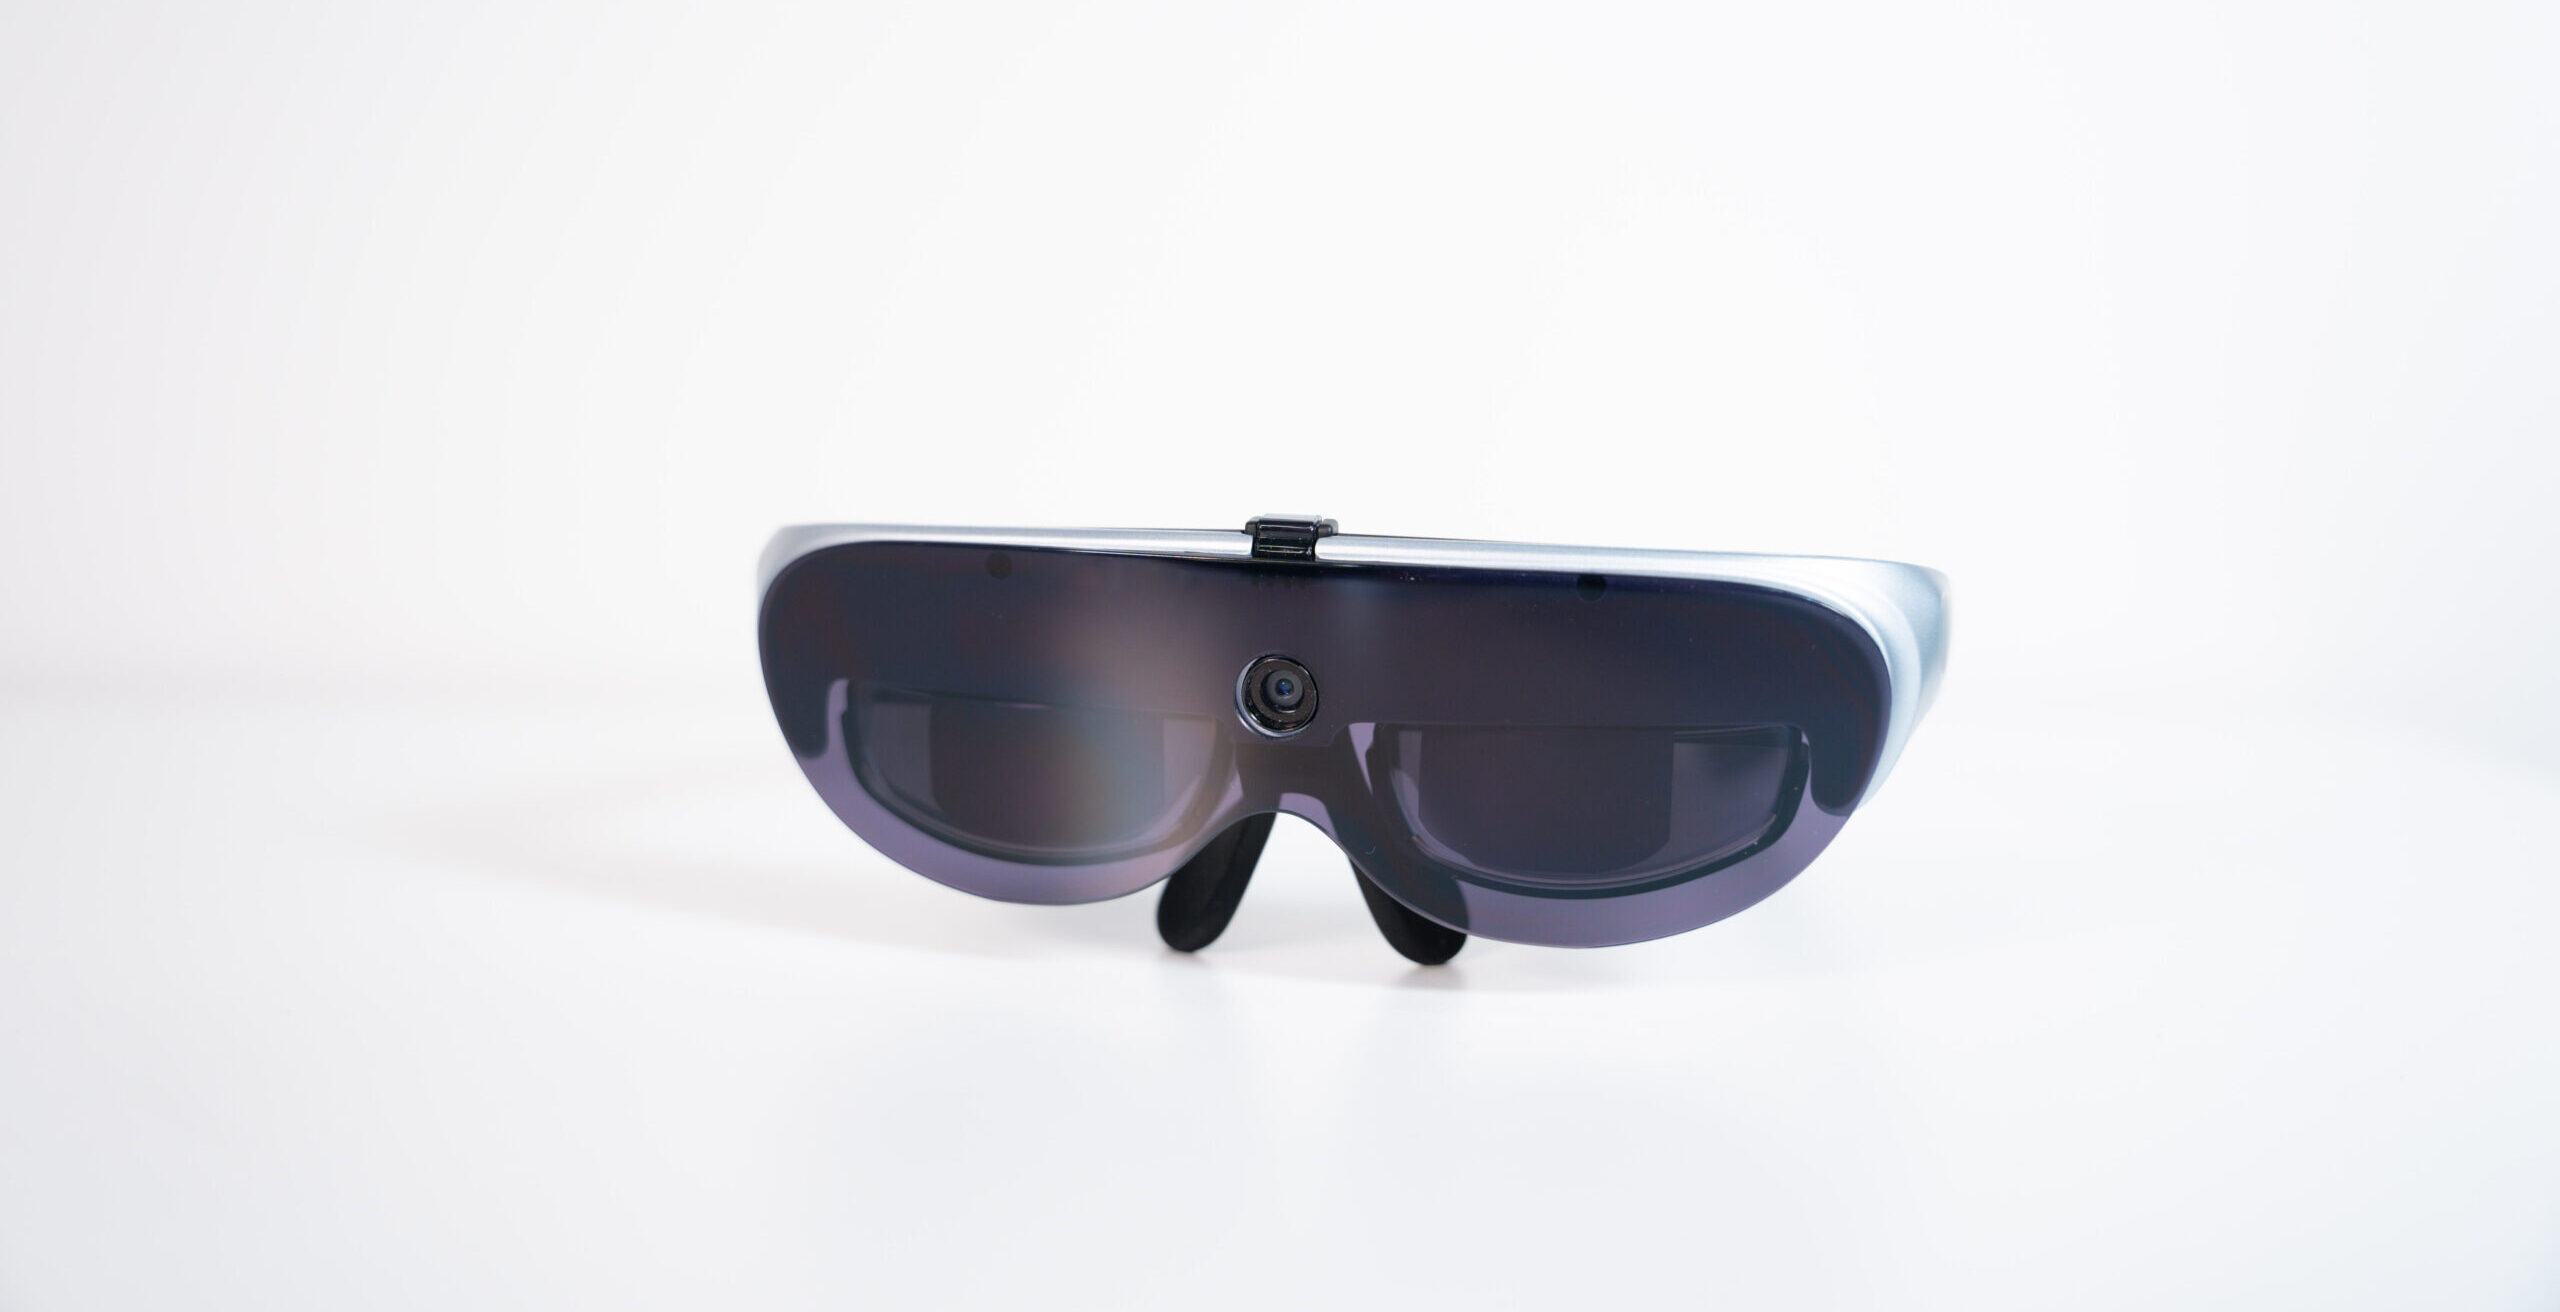 Rokid and Eyedaptic Launch EYE5 Smart Glasses for DR, AMD Patients